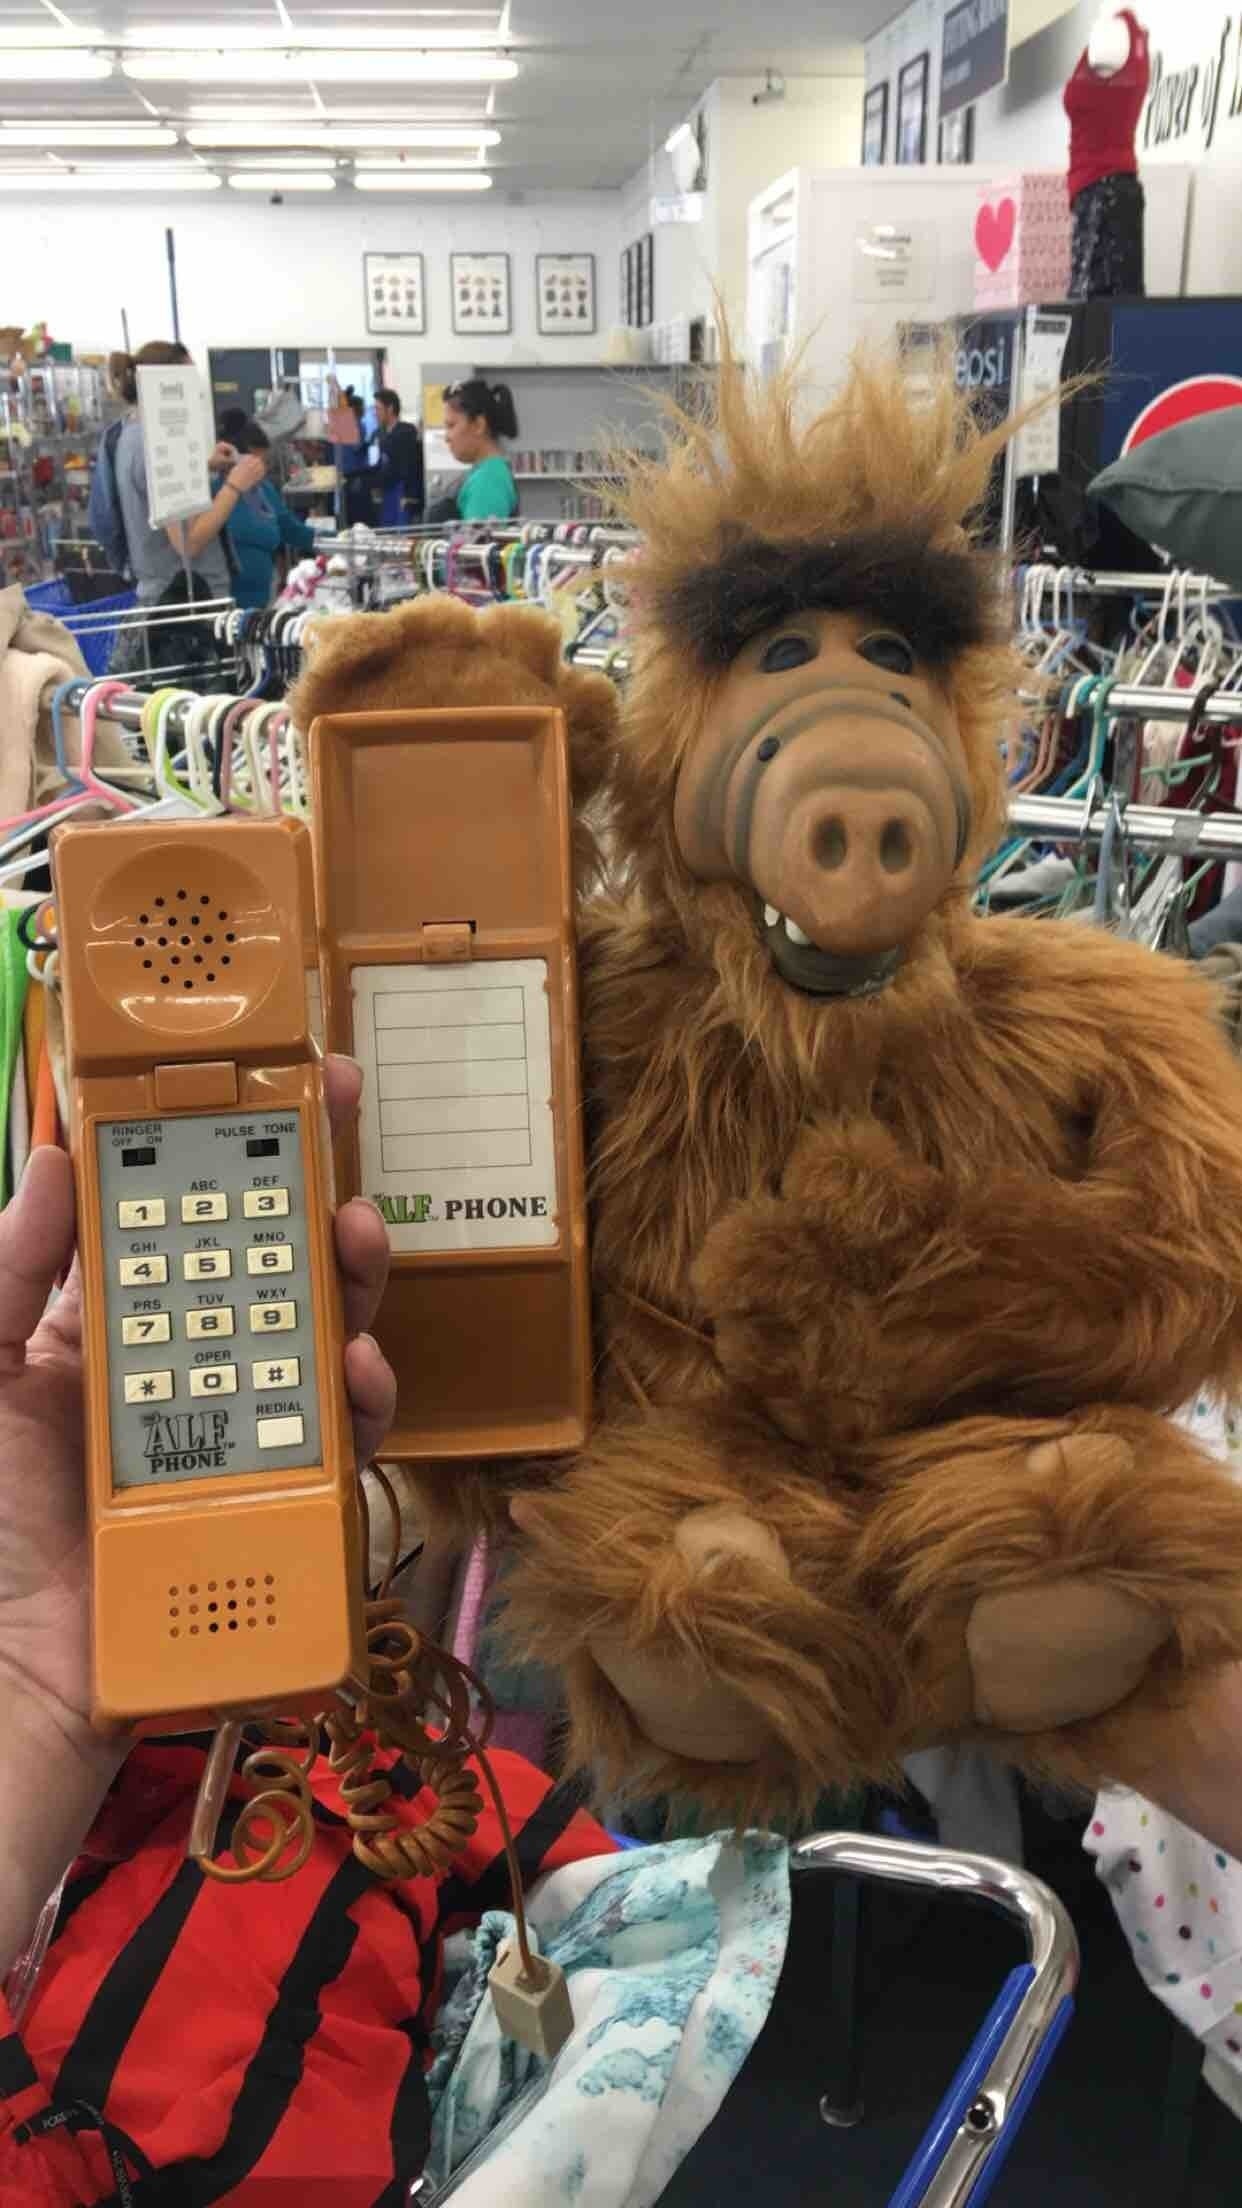 This Alf phone is a pretty important find.